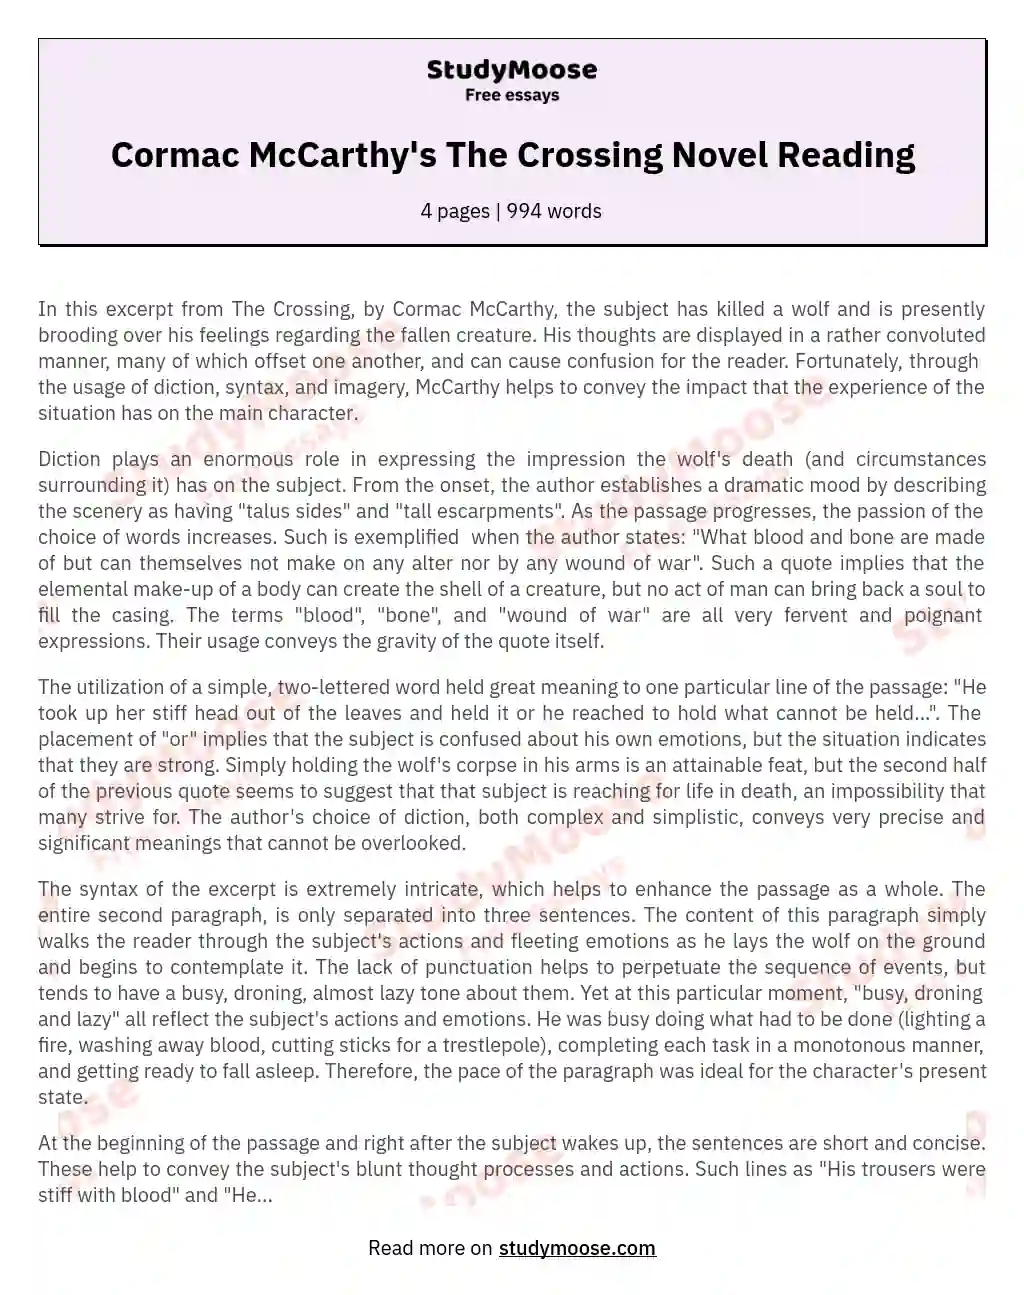 Cormac McCarthy's The Crossing Novel Reading